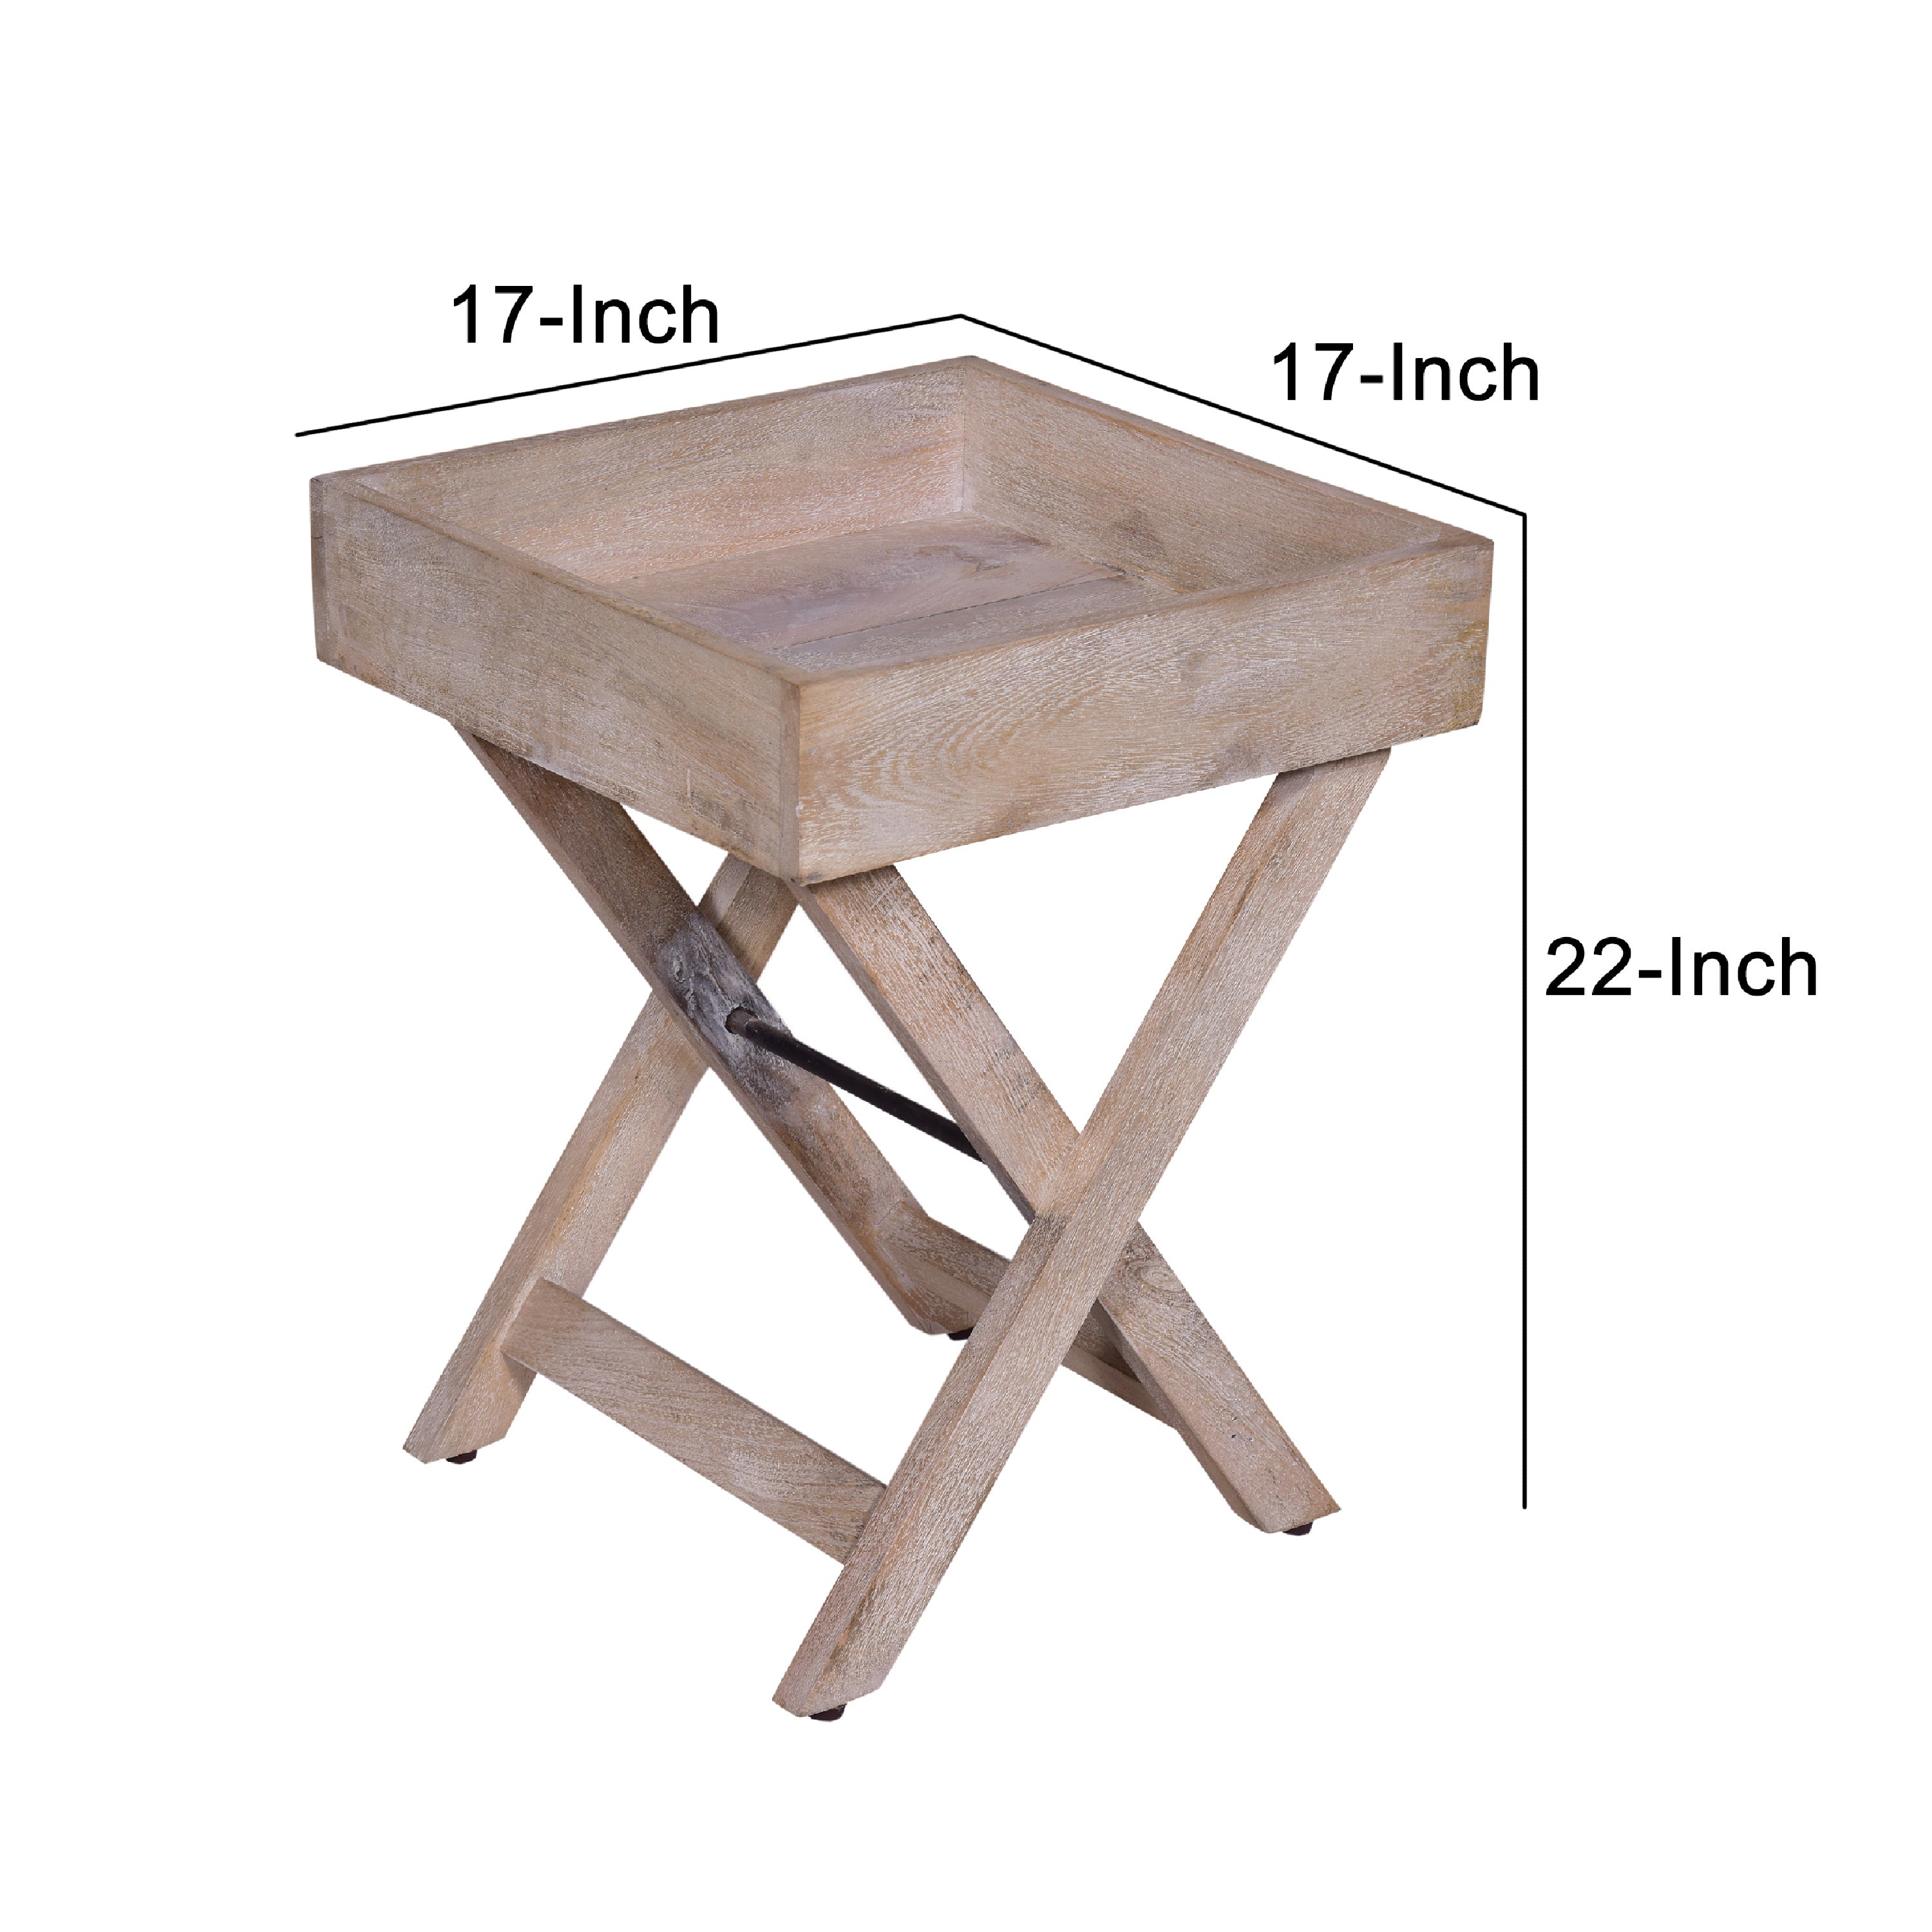 22 Inch Farmhouse Square Tray Top End Table, Mango Wood, X Shape Foldable Frame - Washed White/Natural